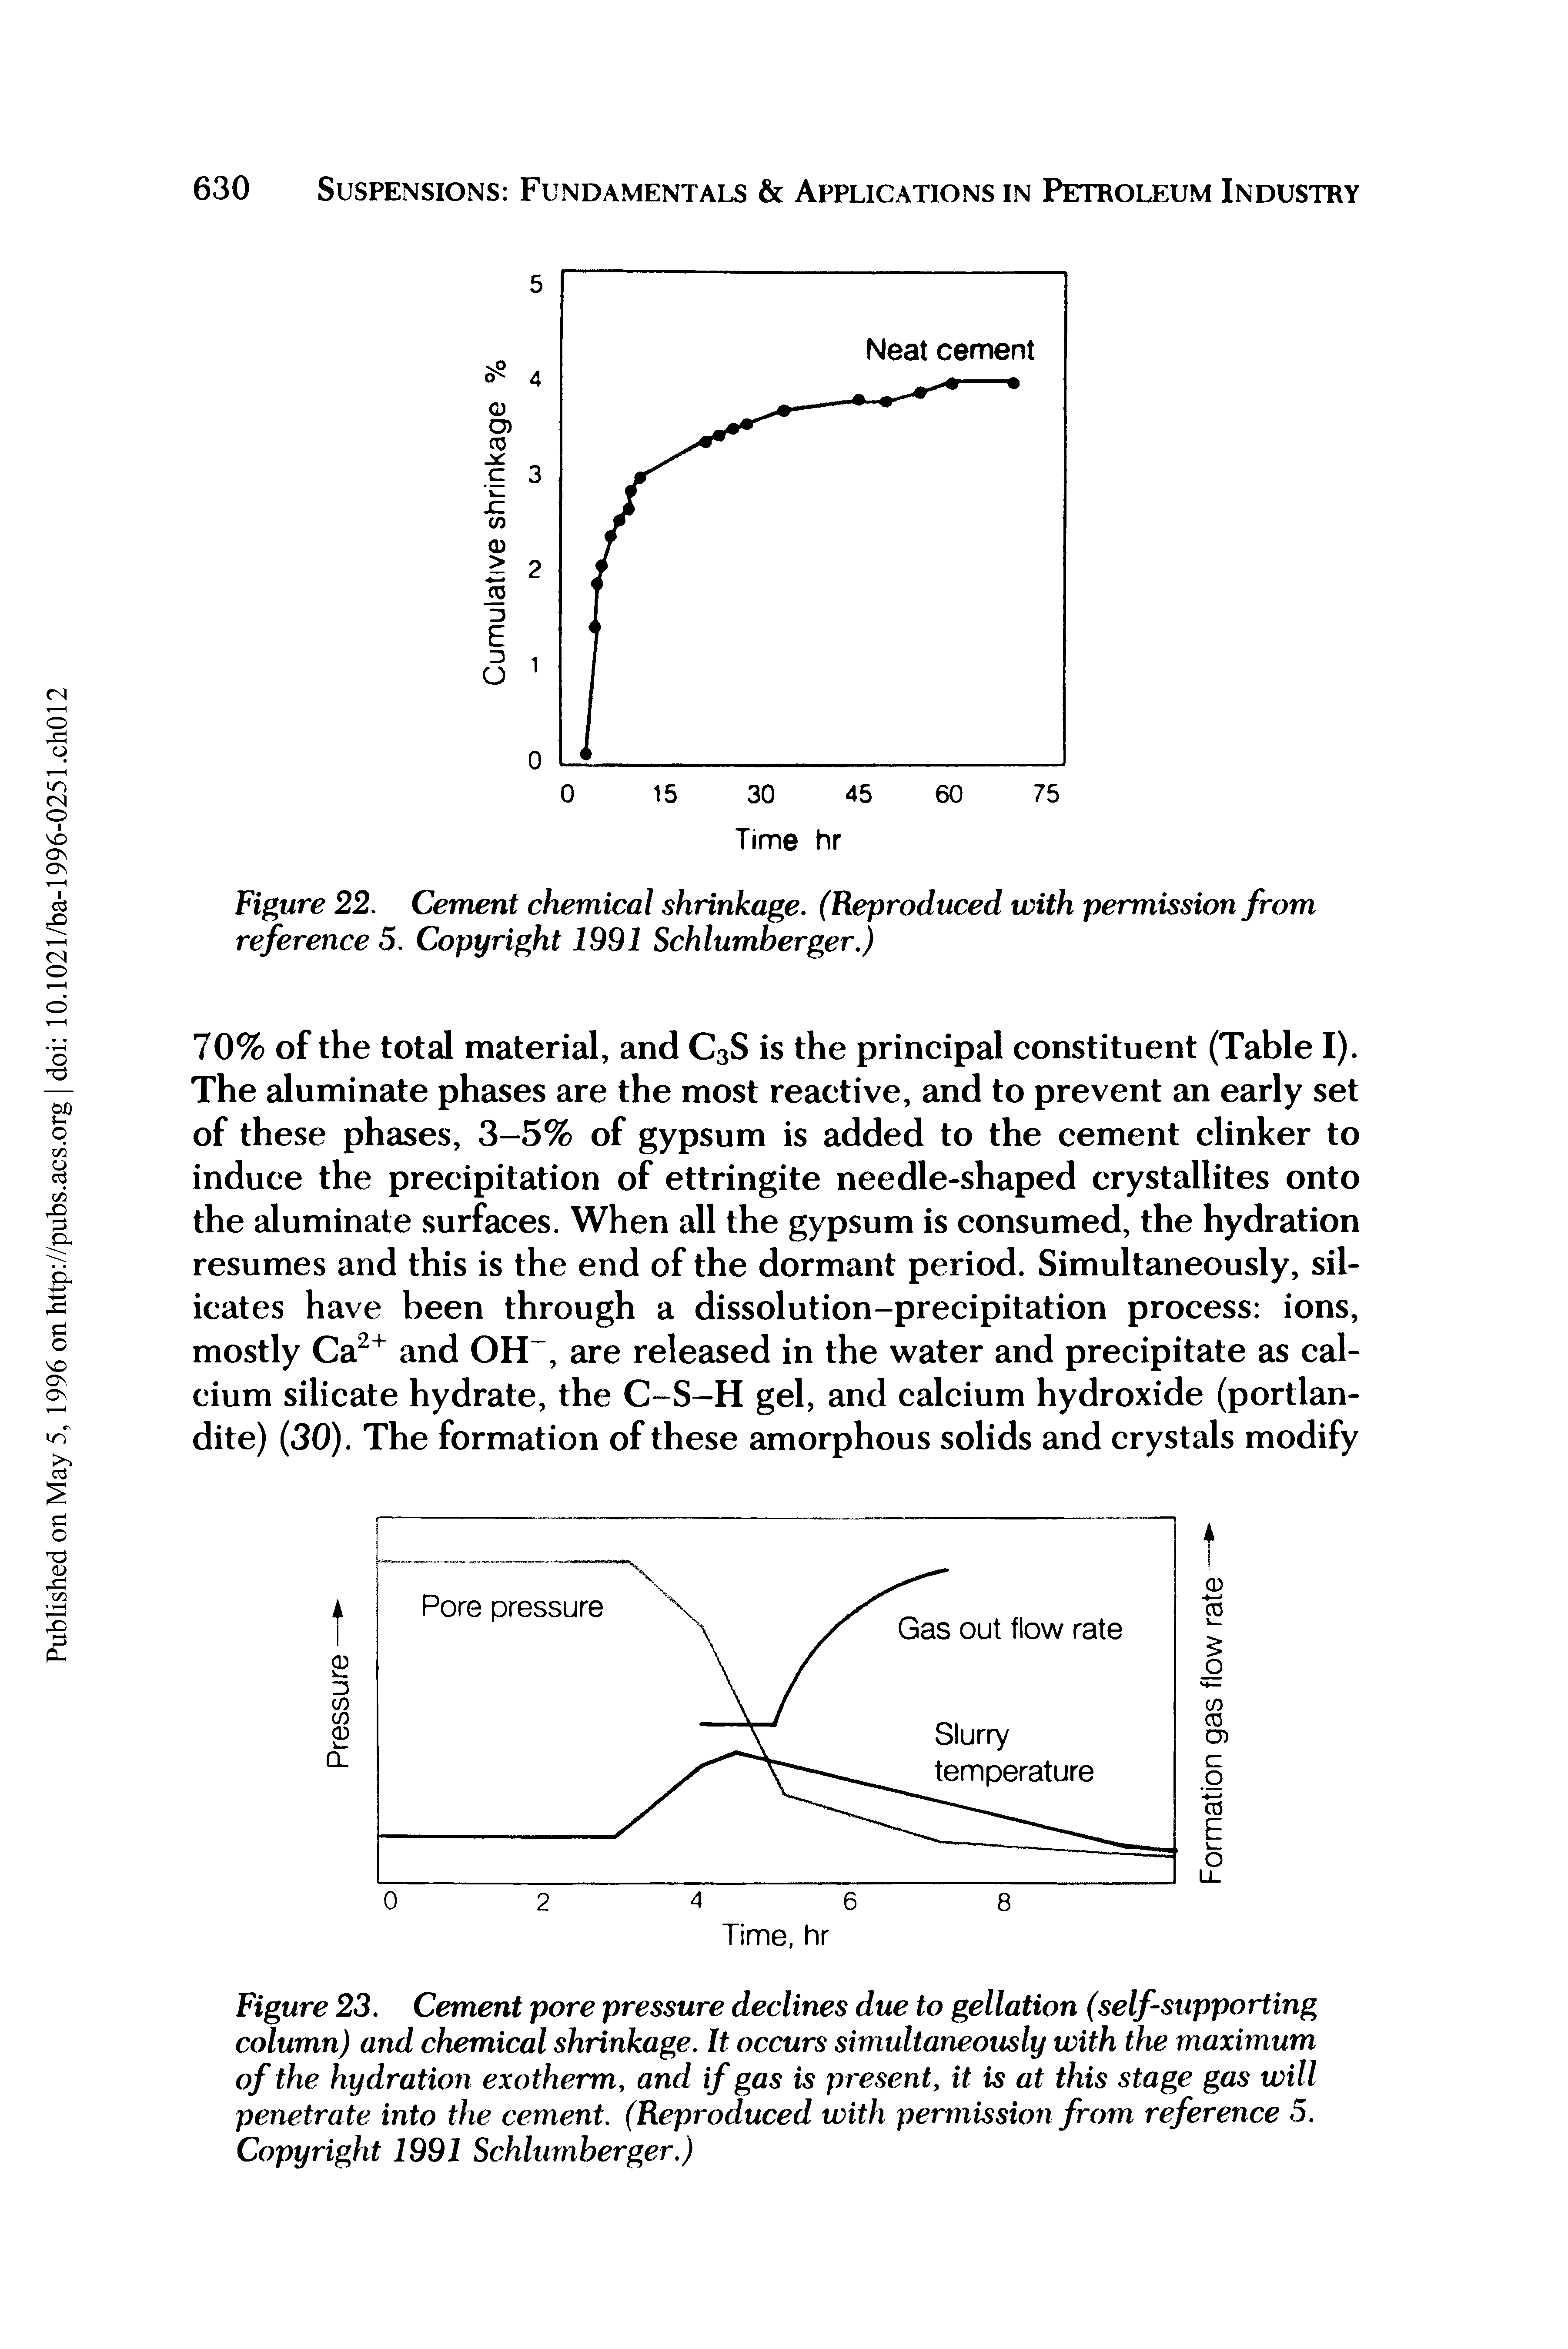 Figure 23. Cement pore pressure declines due to gellation (self-supporting column) and chemical shrinkage. It occurs simultaneously with the maximum of the hydration exotherm, and if gas is present, it is at this stage gas will penetrate into the cement. (Reproduced with permission from reference 5. Copyright 1991 Schlumberger.)...